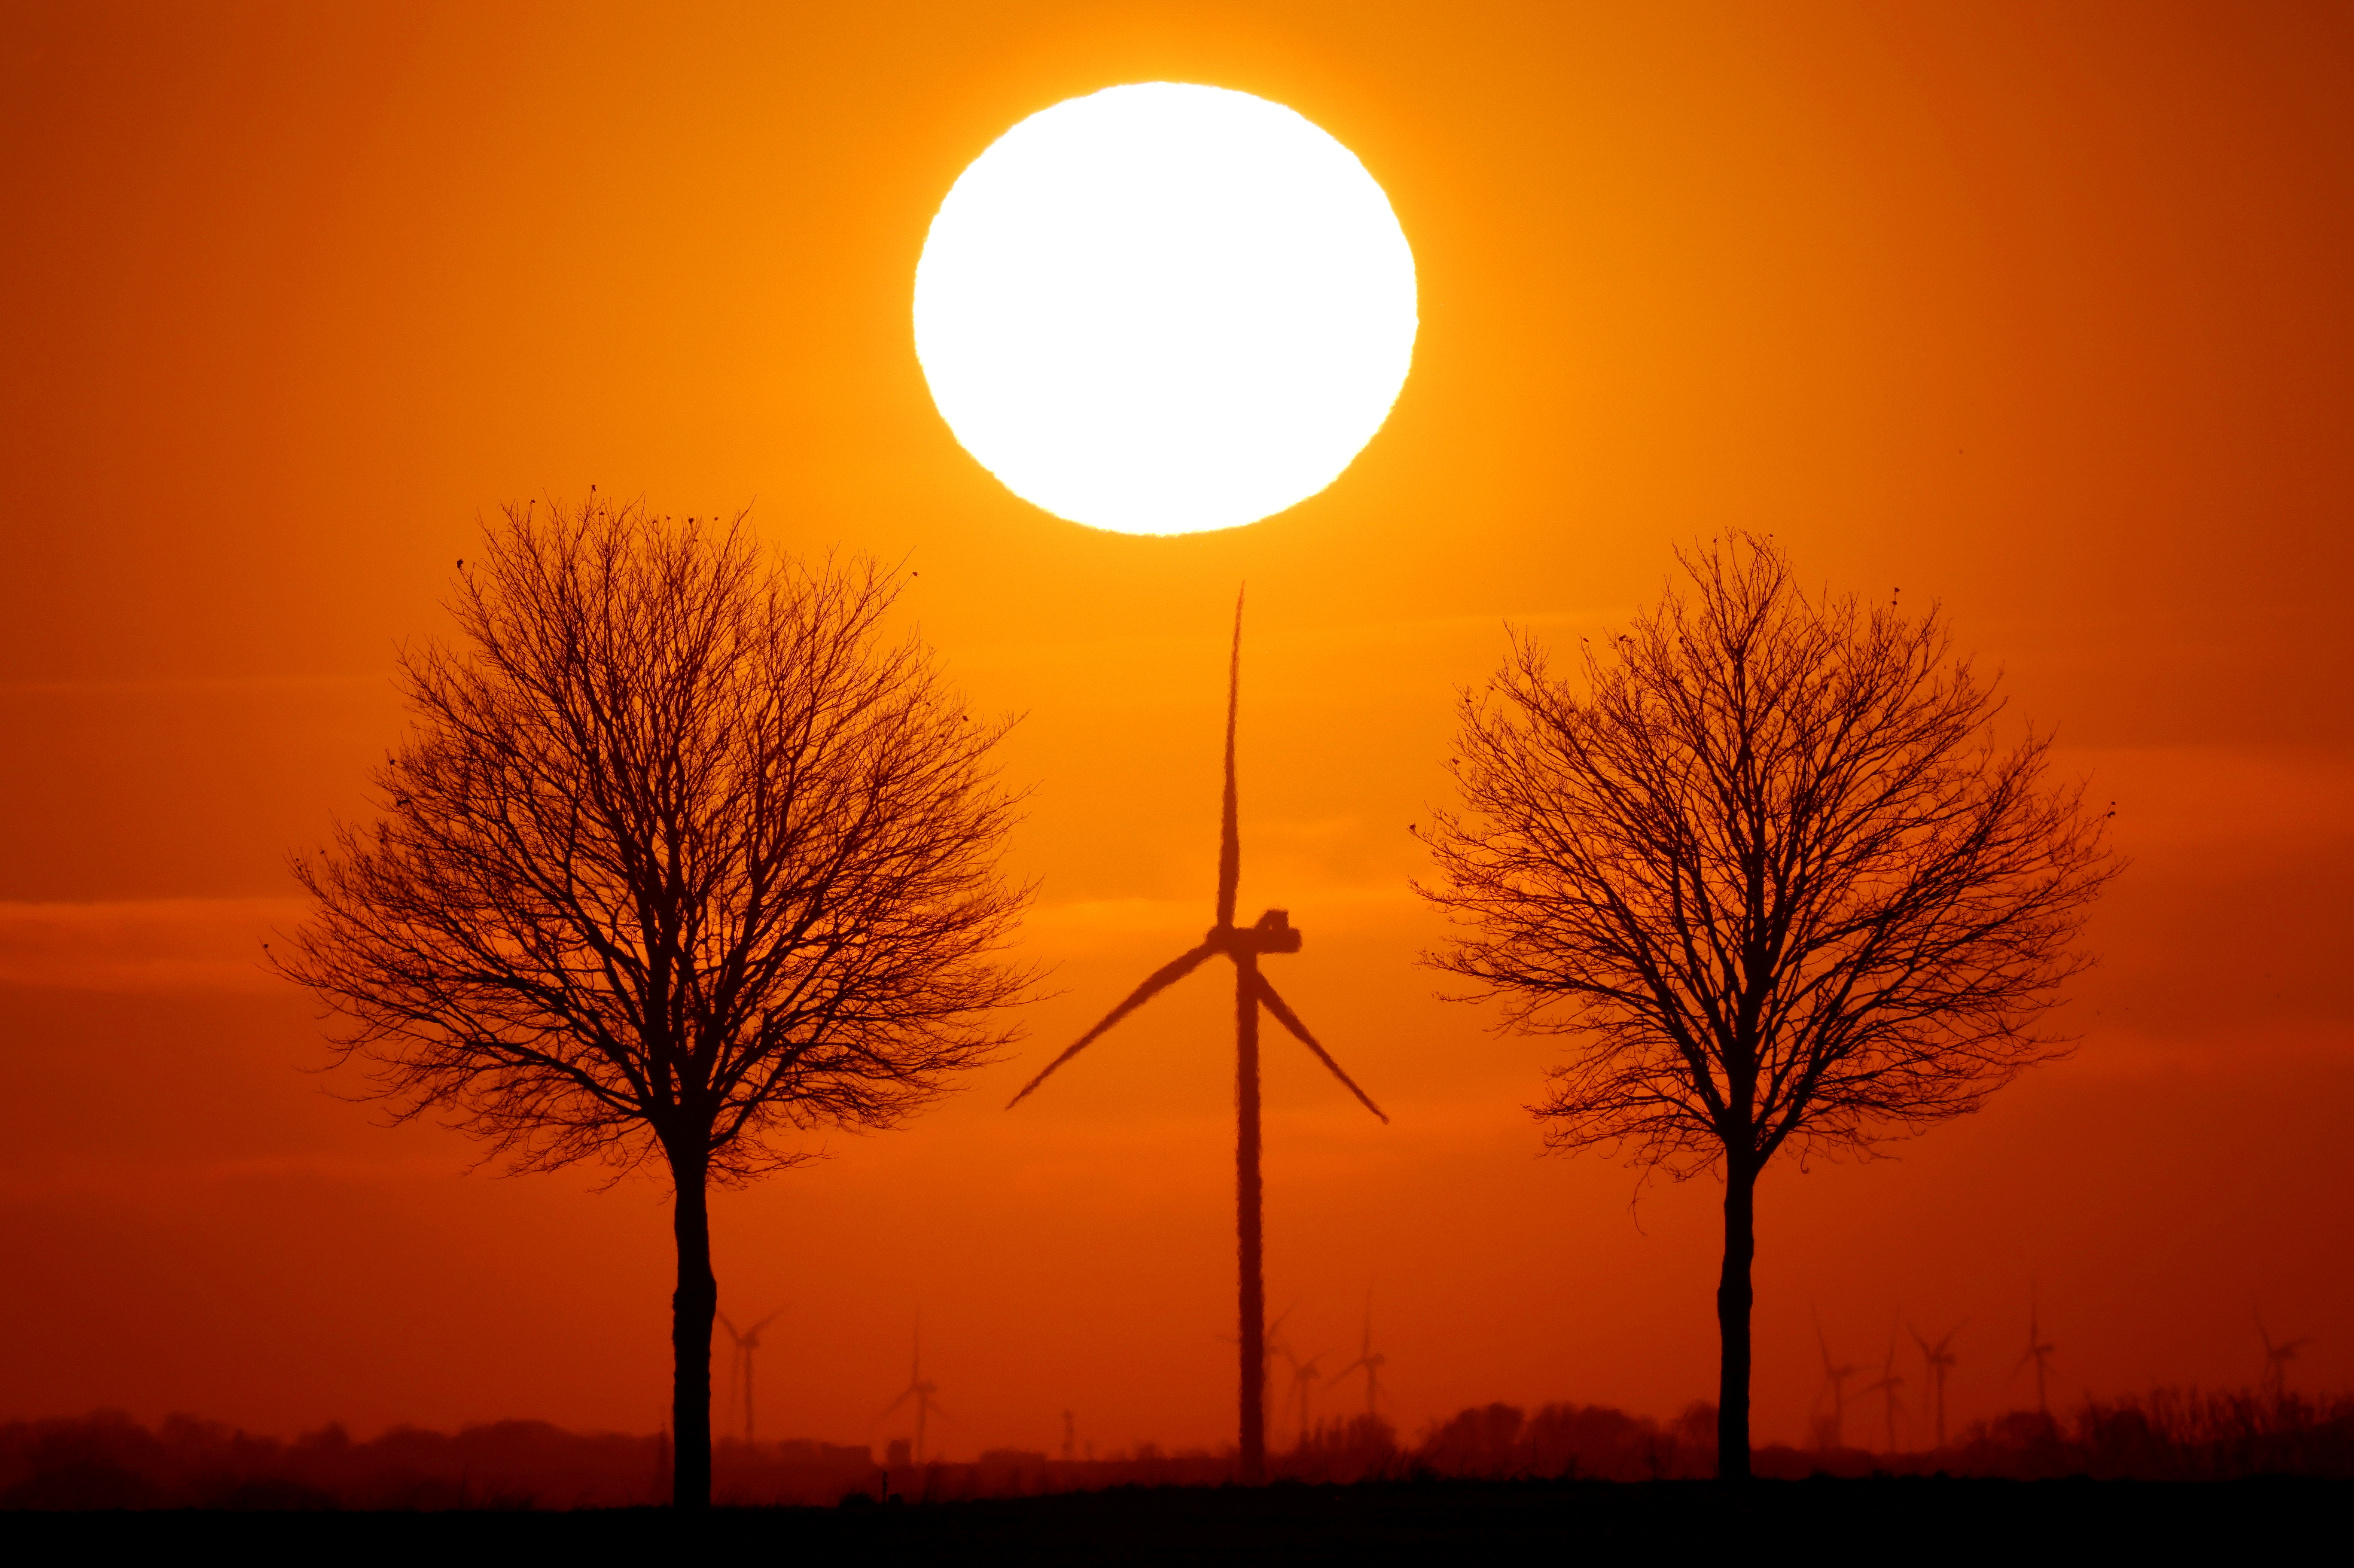 Power-generating windmill turbines are seen during sunset in Bourlon, France, February 23, 2021. REUTERS/Pascal Rossignol/File Photo